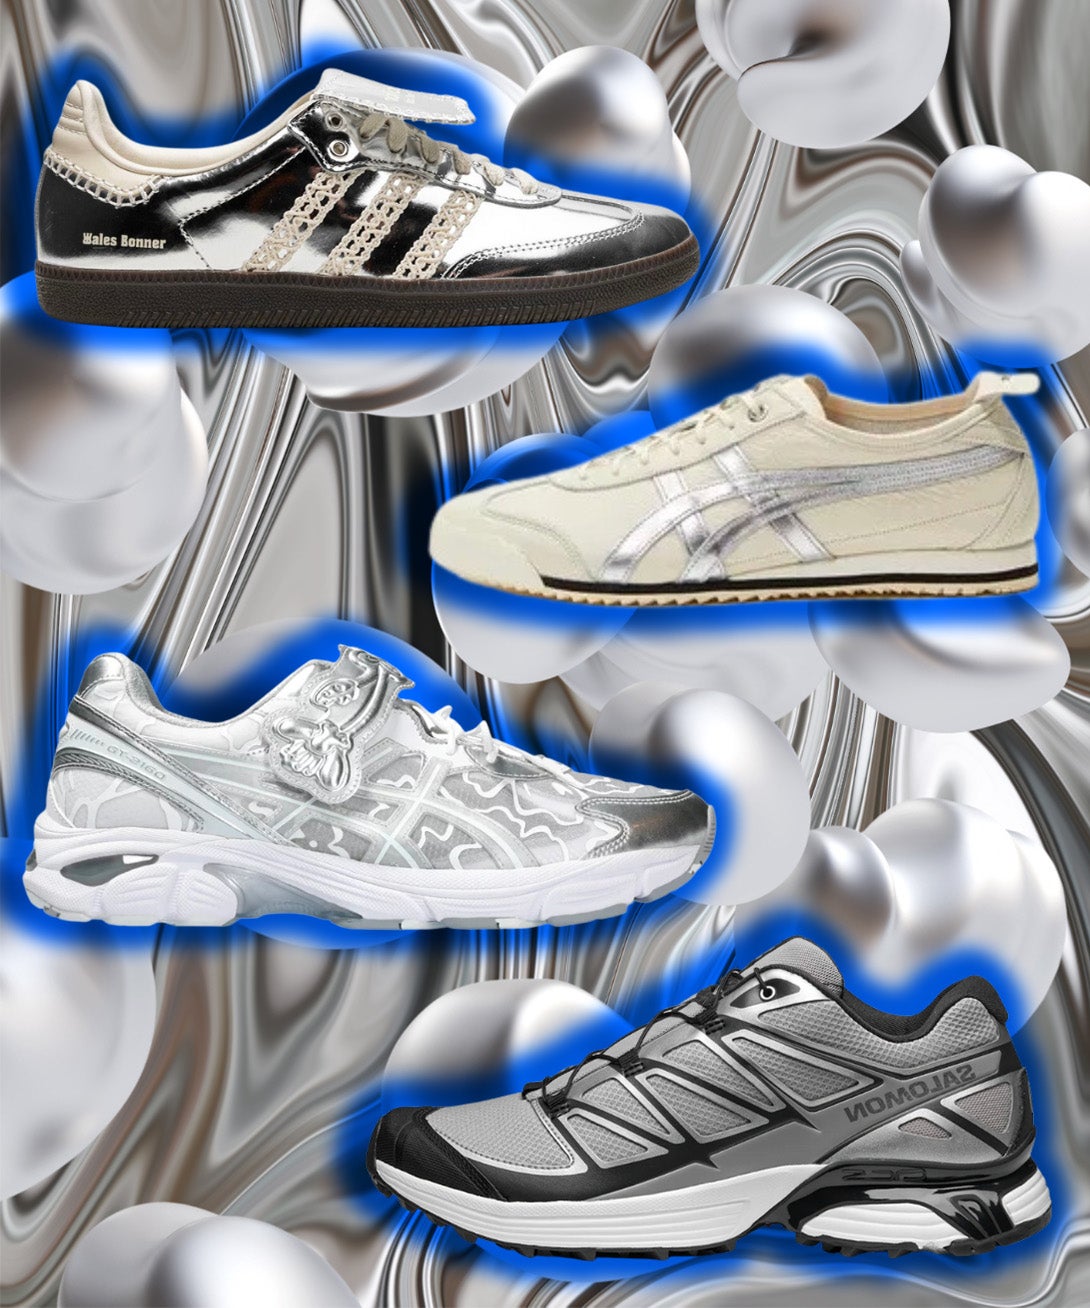 Best Silver Sneakers: Silver Shoes From Nike, Puma, Adidas, and More